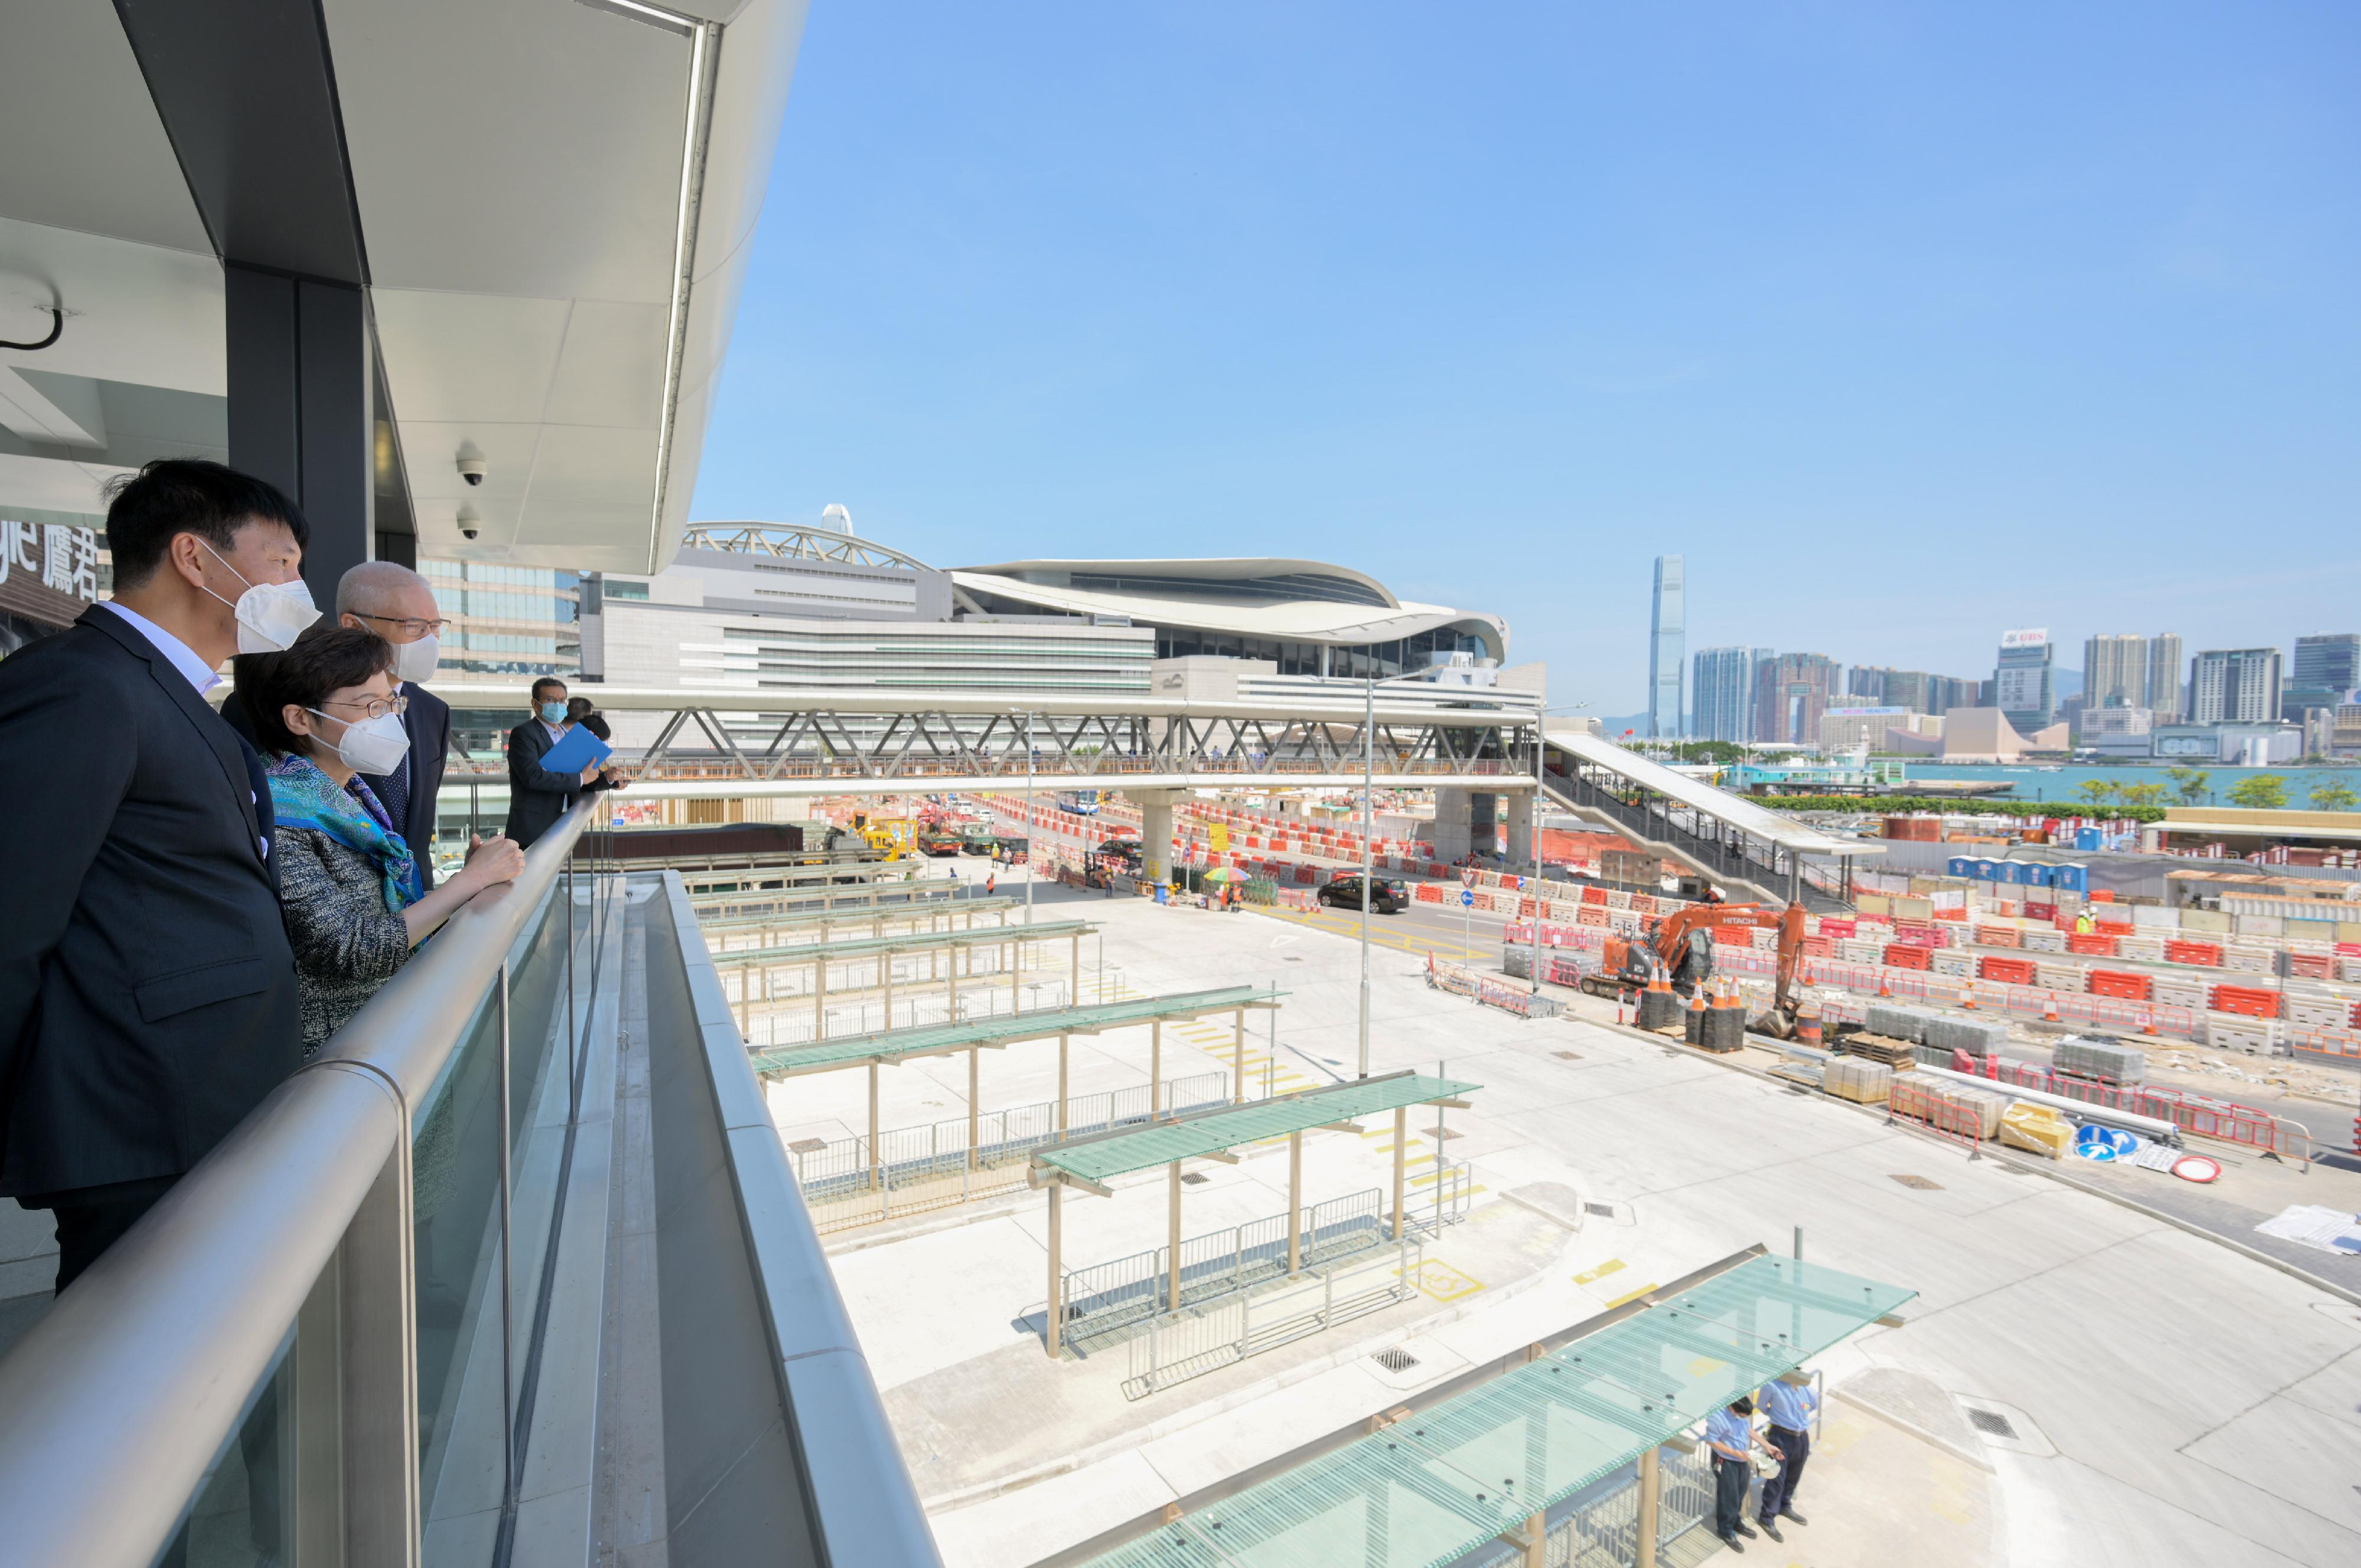 The Chief Executive, Mrs Carrie Lam, visited Wan Chai North today (May 4) to view the newly constructed Exhibition Centre Station of the East Rail Line cross-harbour extension and the neighbouring facilities. Photo shows Mrs Lam (second left) looking at the transportation facilities near Exhibition Centre Station. Also present are the Director of Highways, Mr Jimmy Chan (first left), and the Chairman of the MTR Corporation Limited, Dr Rex Auyeung (third left).